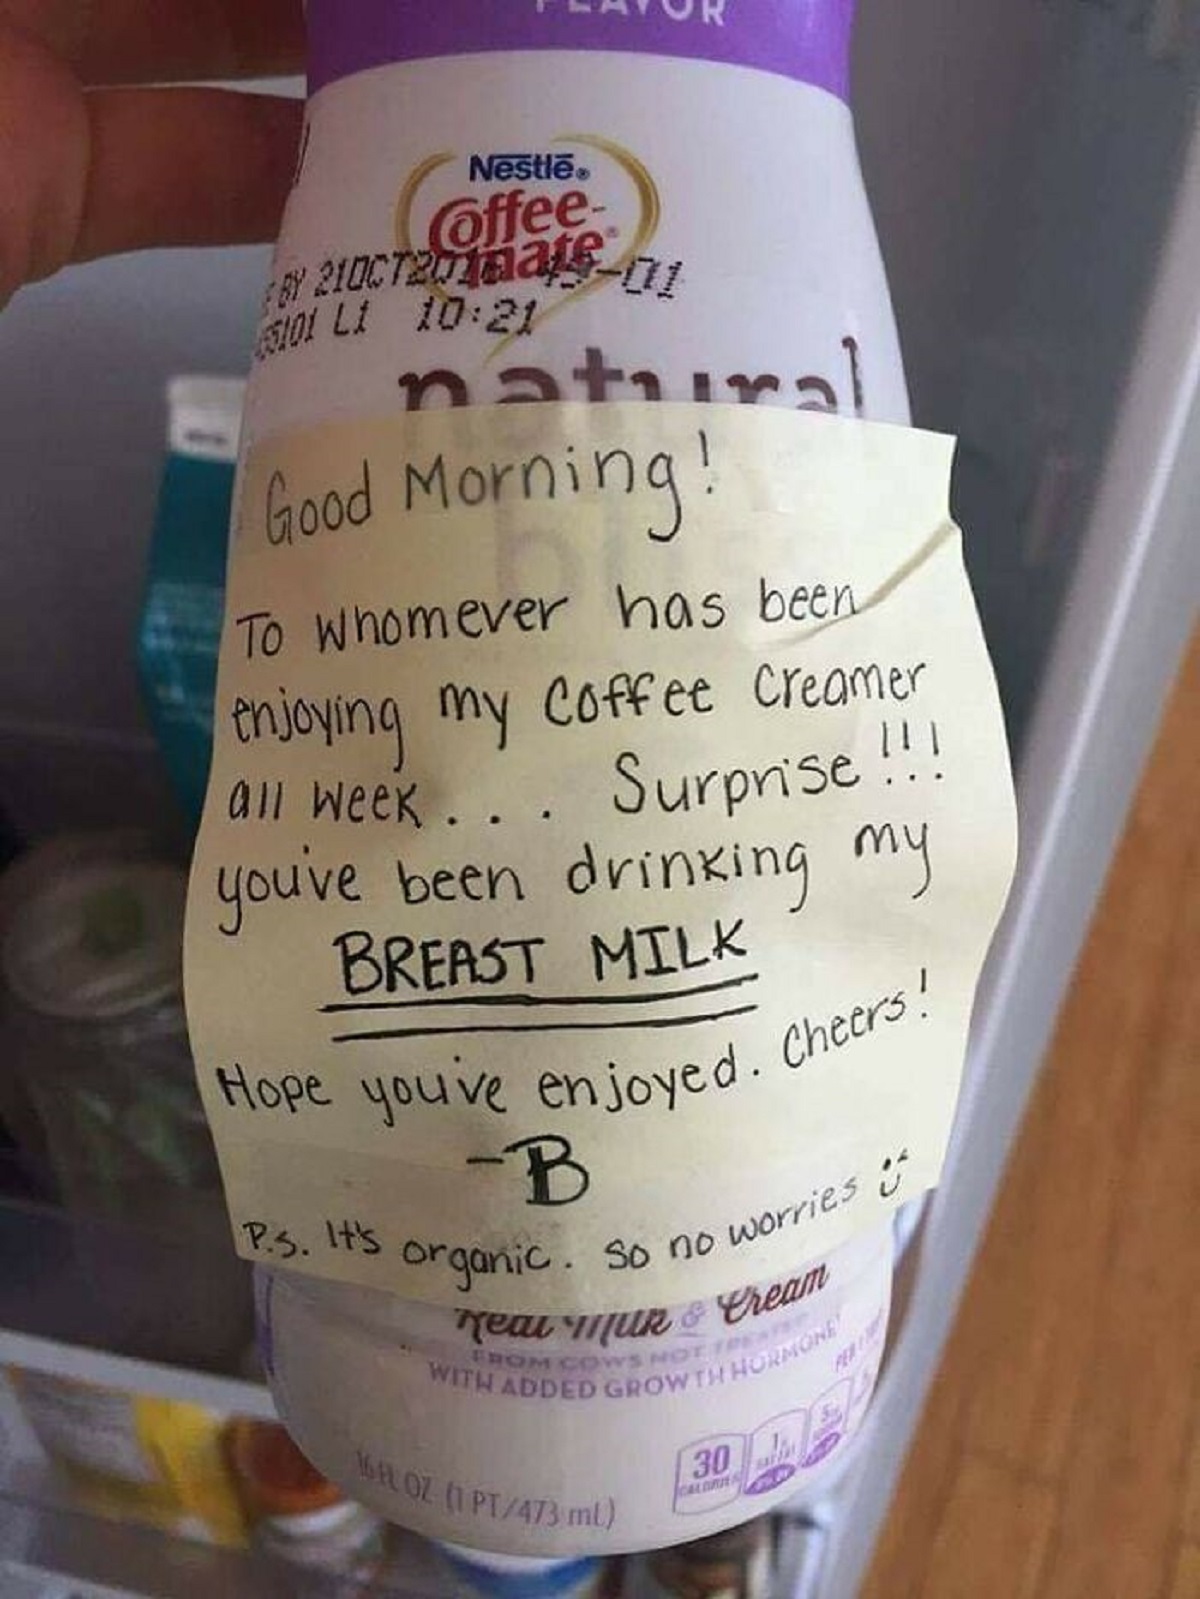 breast milk coffee creamer - Nestle Coffee By 210CT2001 101 L1 natural Good Morning! To whomever has been enjoying my Coffee Creamer all week... Surprise!!! you've been drinking my Breast Milk Hope you've enjoyed. Cheers! B Ps. It's organic. So no worries